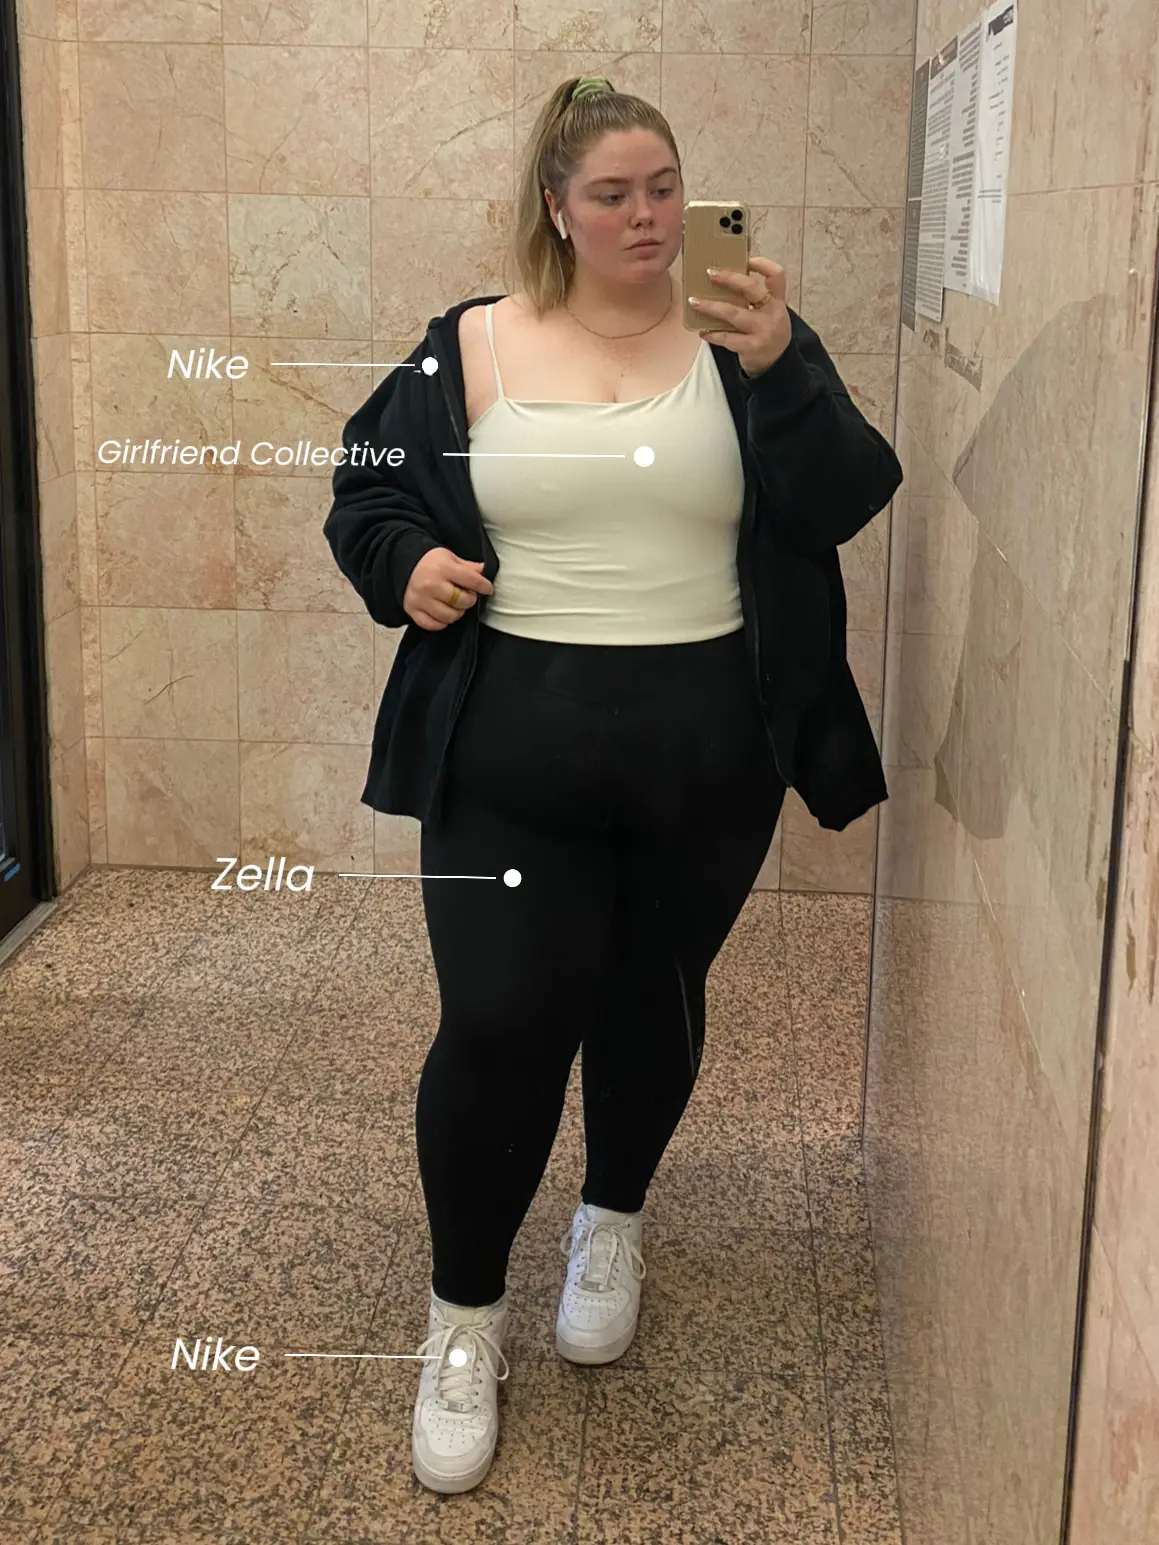 I'm a plus-size gym baddie who wears 'cute' outfits to workout